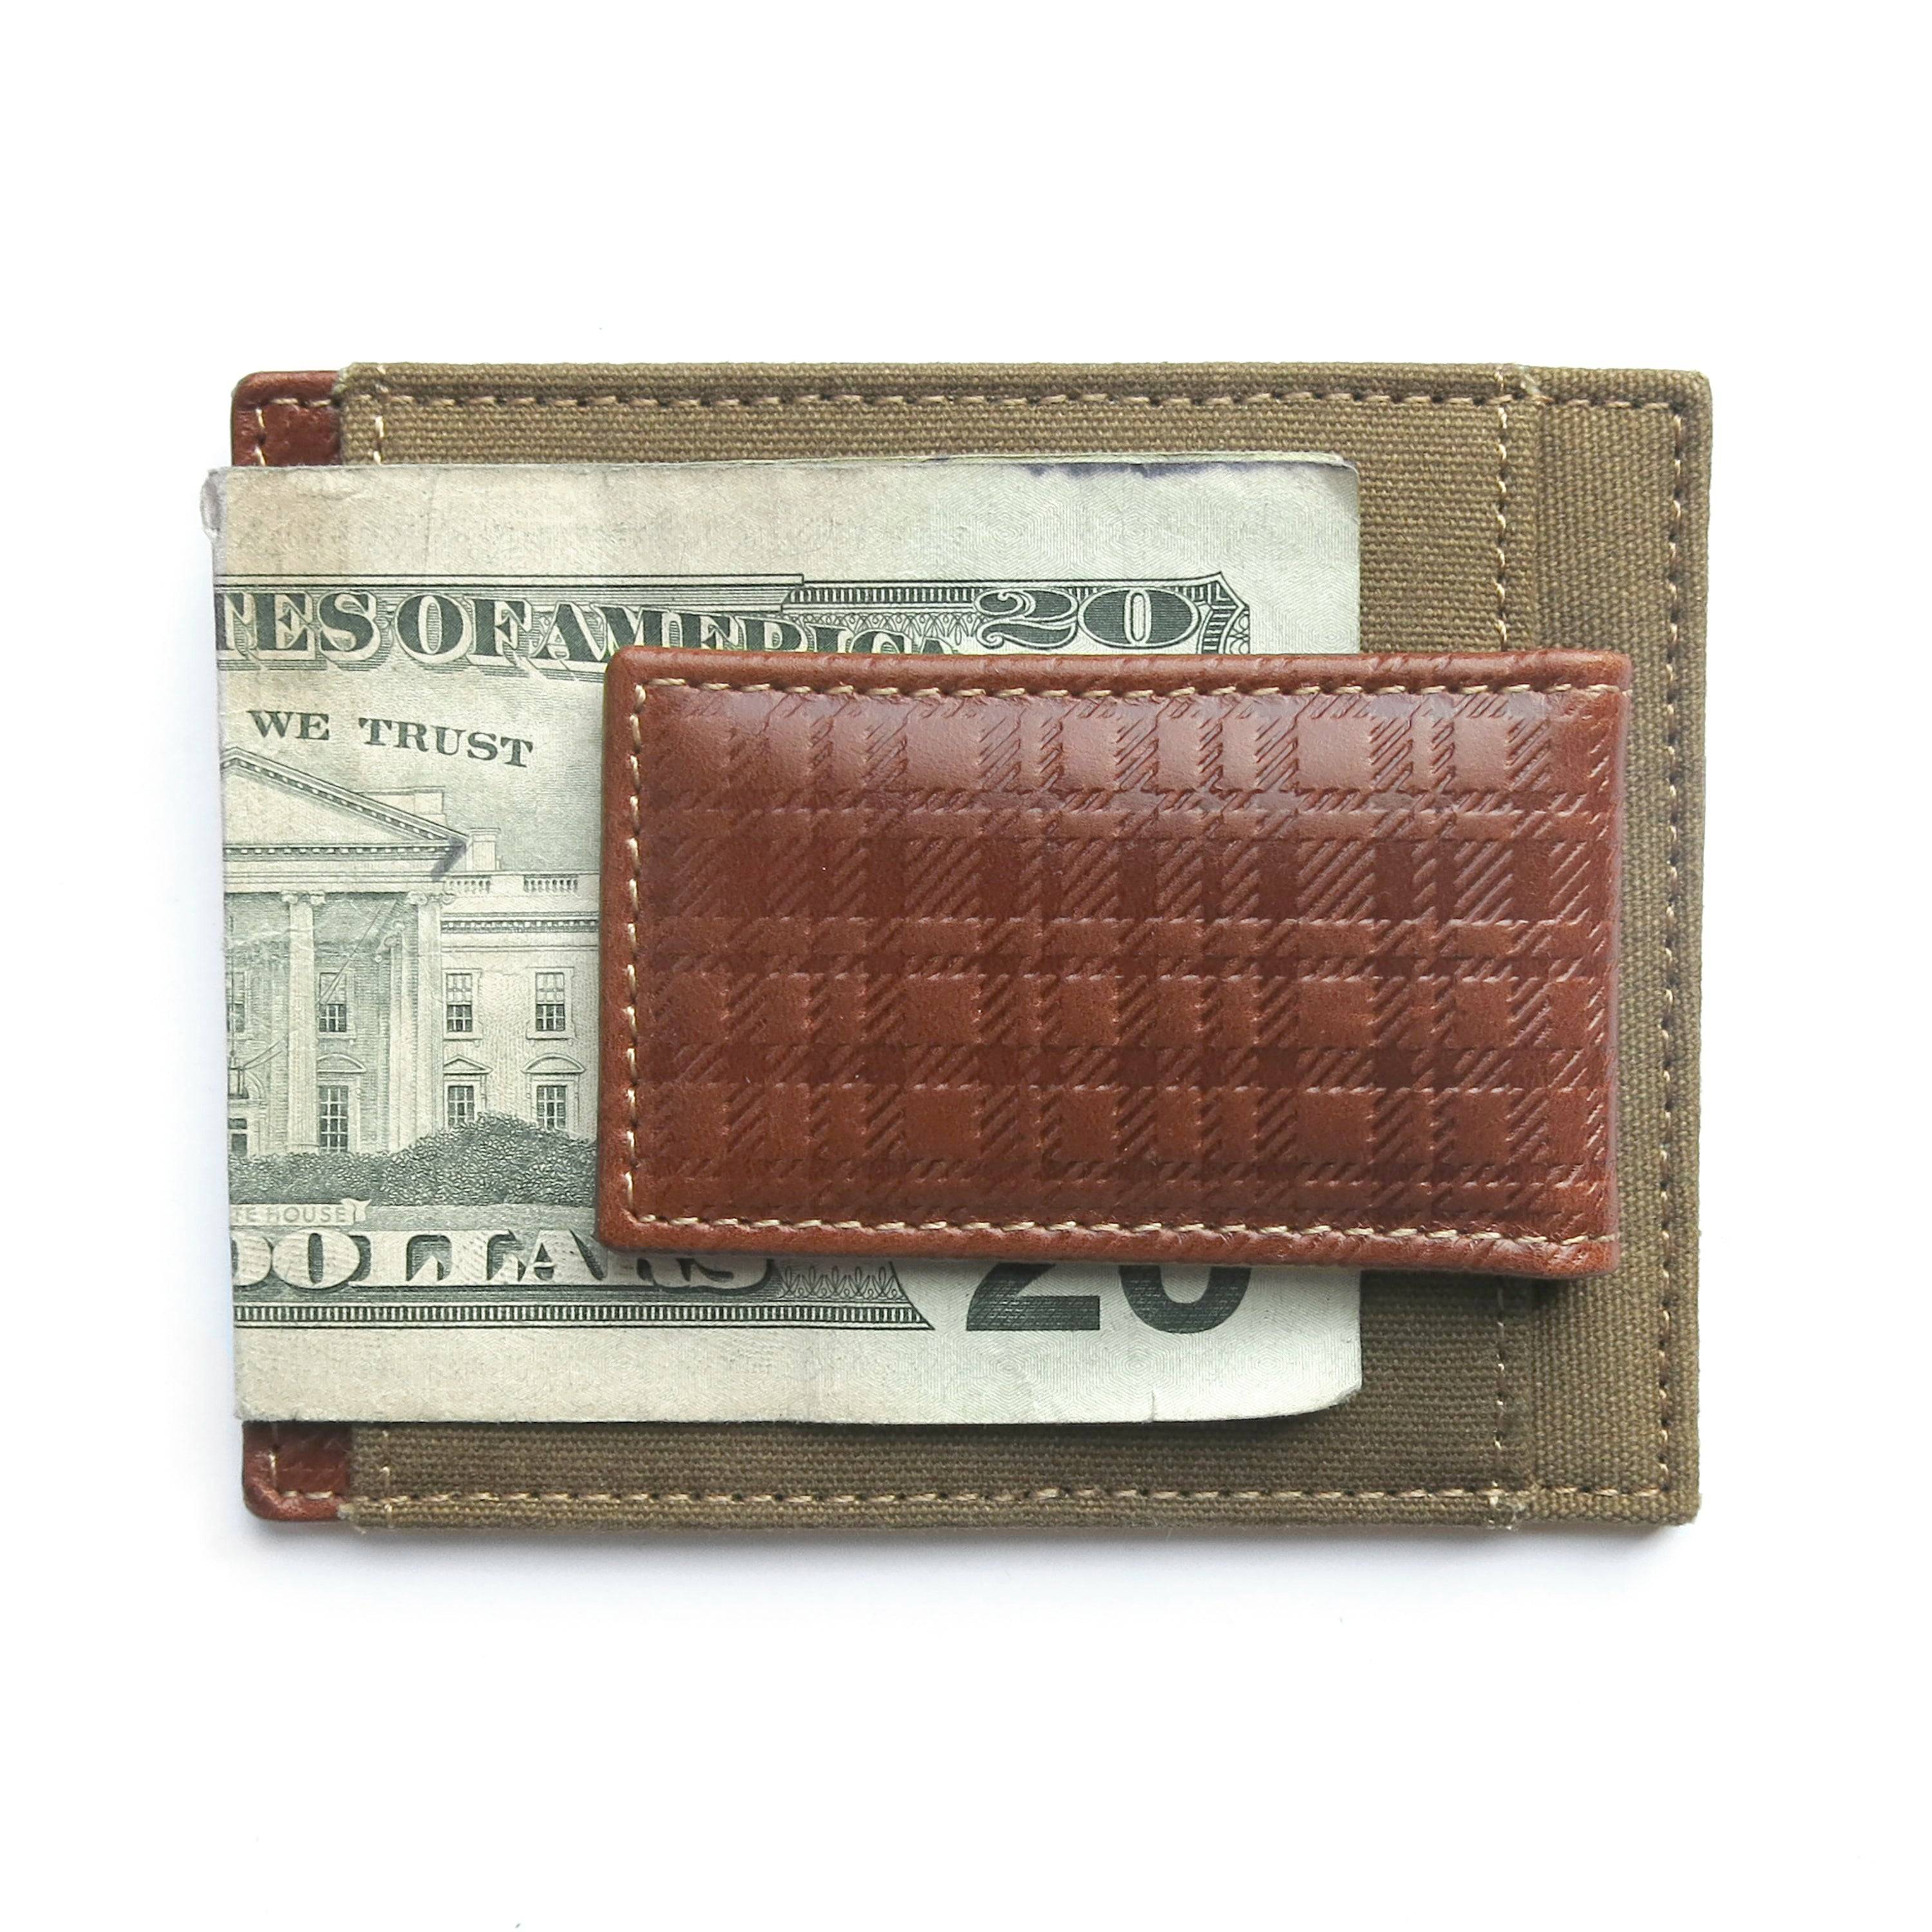 Money Clip holding Money, Blake Leather and Canvas Money Clip Card Case